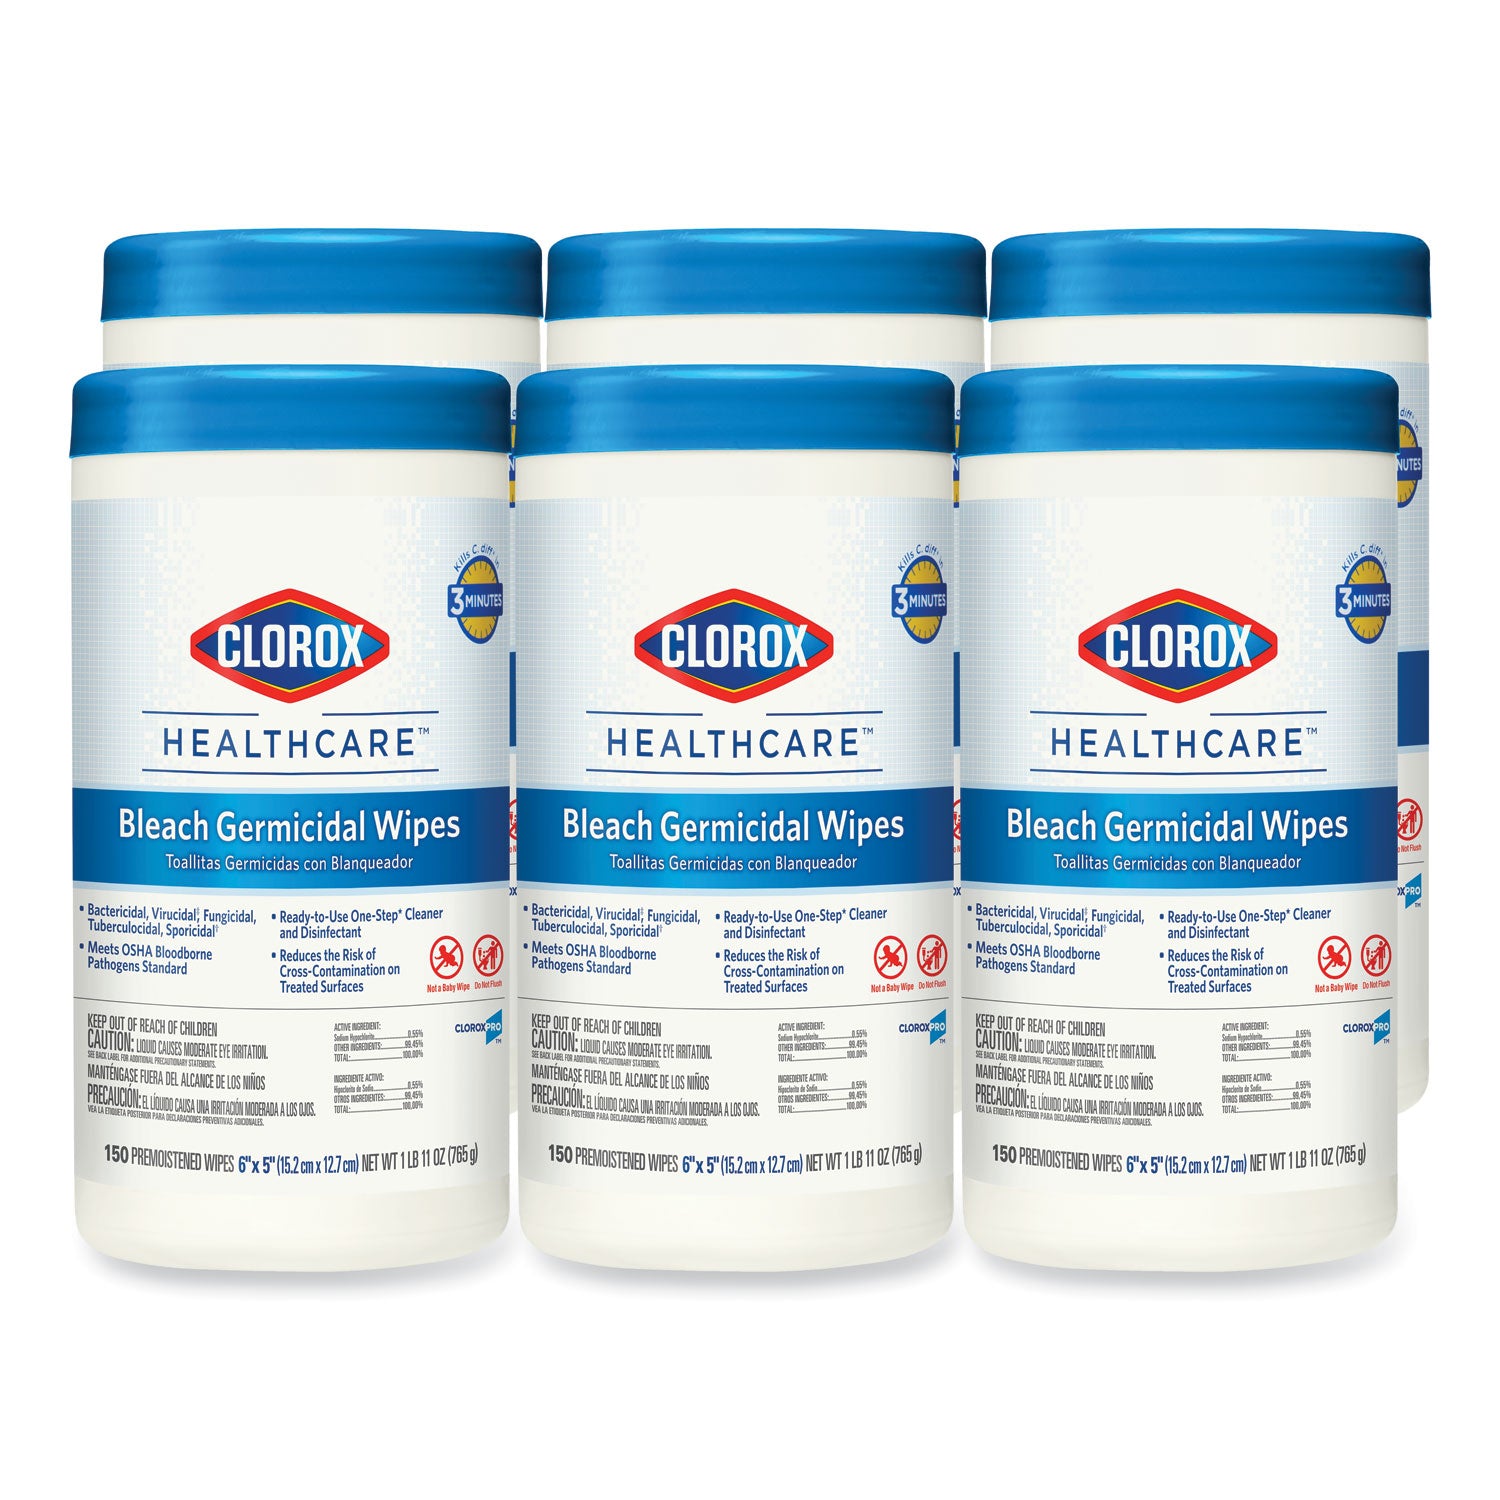 Bleach Germicidal Wipes, 1-Ply, 6 x 5, Unscented, White, 150/Canister, 6 Canisters/Carton - 